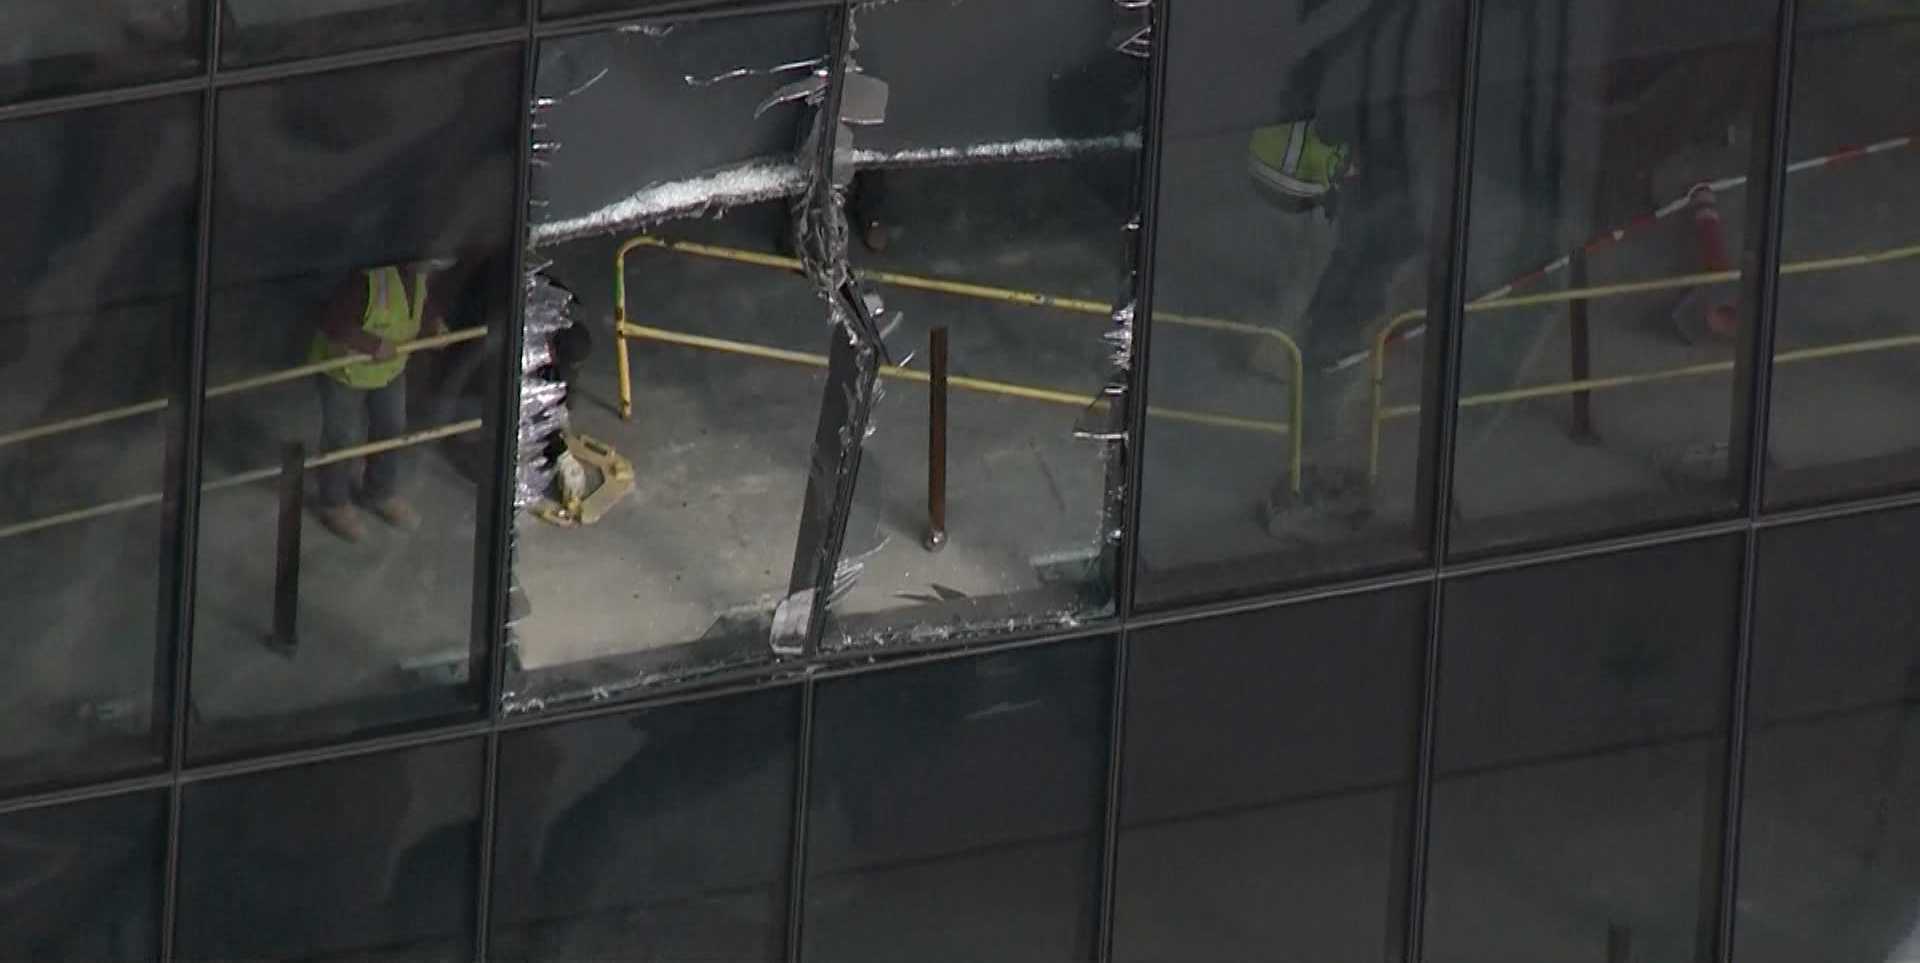 Two windows at South Station Tower, which is still under construction in Boston, Massachusetts, were smashed during a construction accident on March 20, 2024.